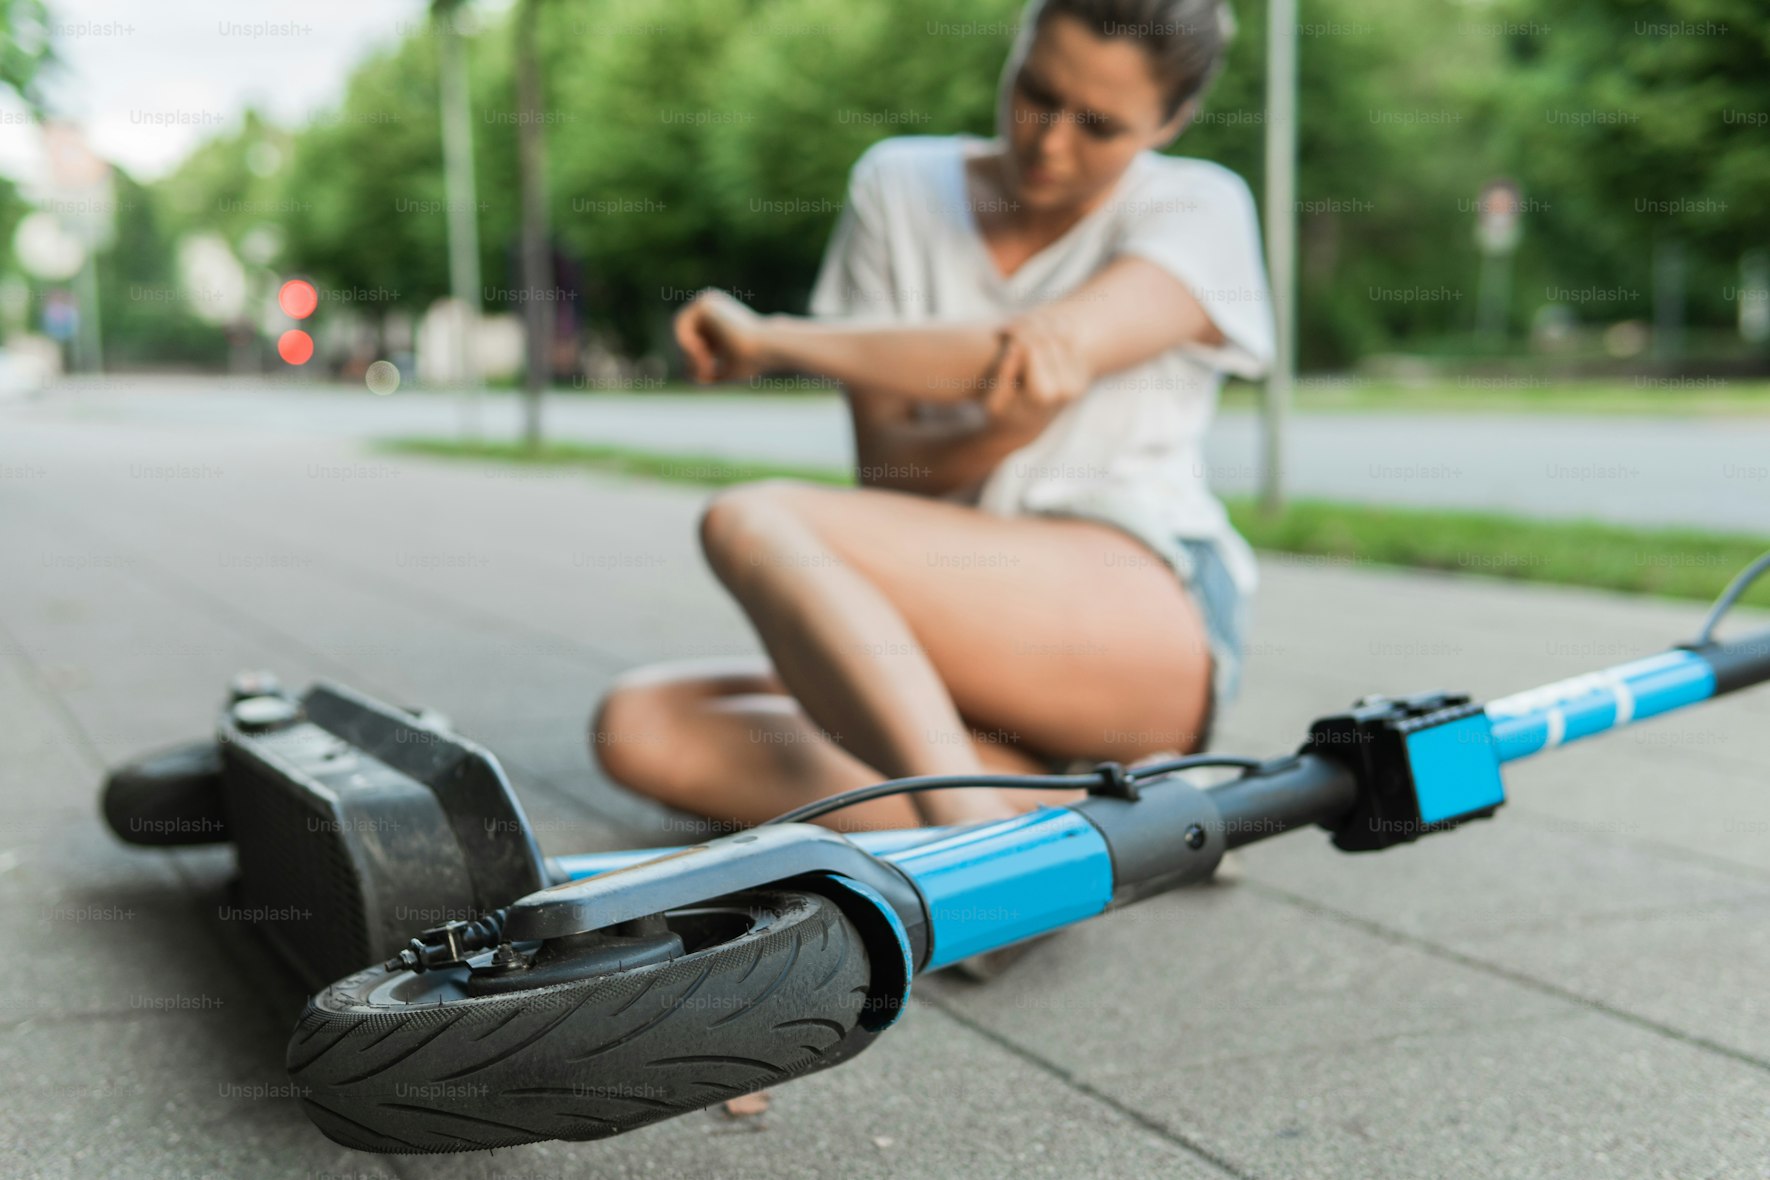 An injured woman lying on ground with a fallen e-scooter beside her